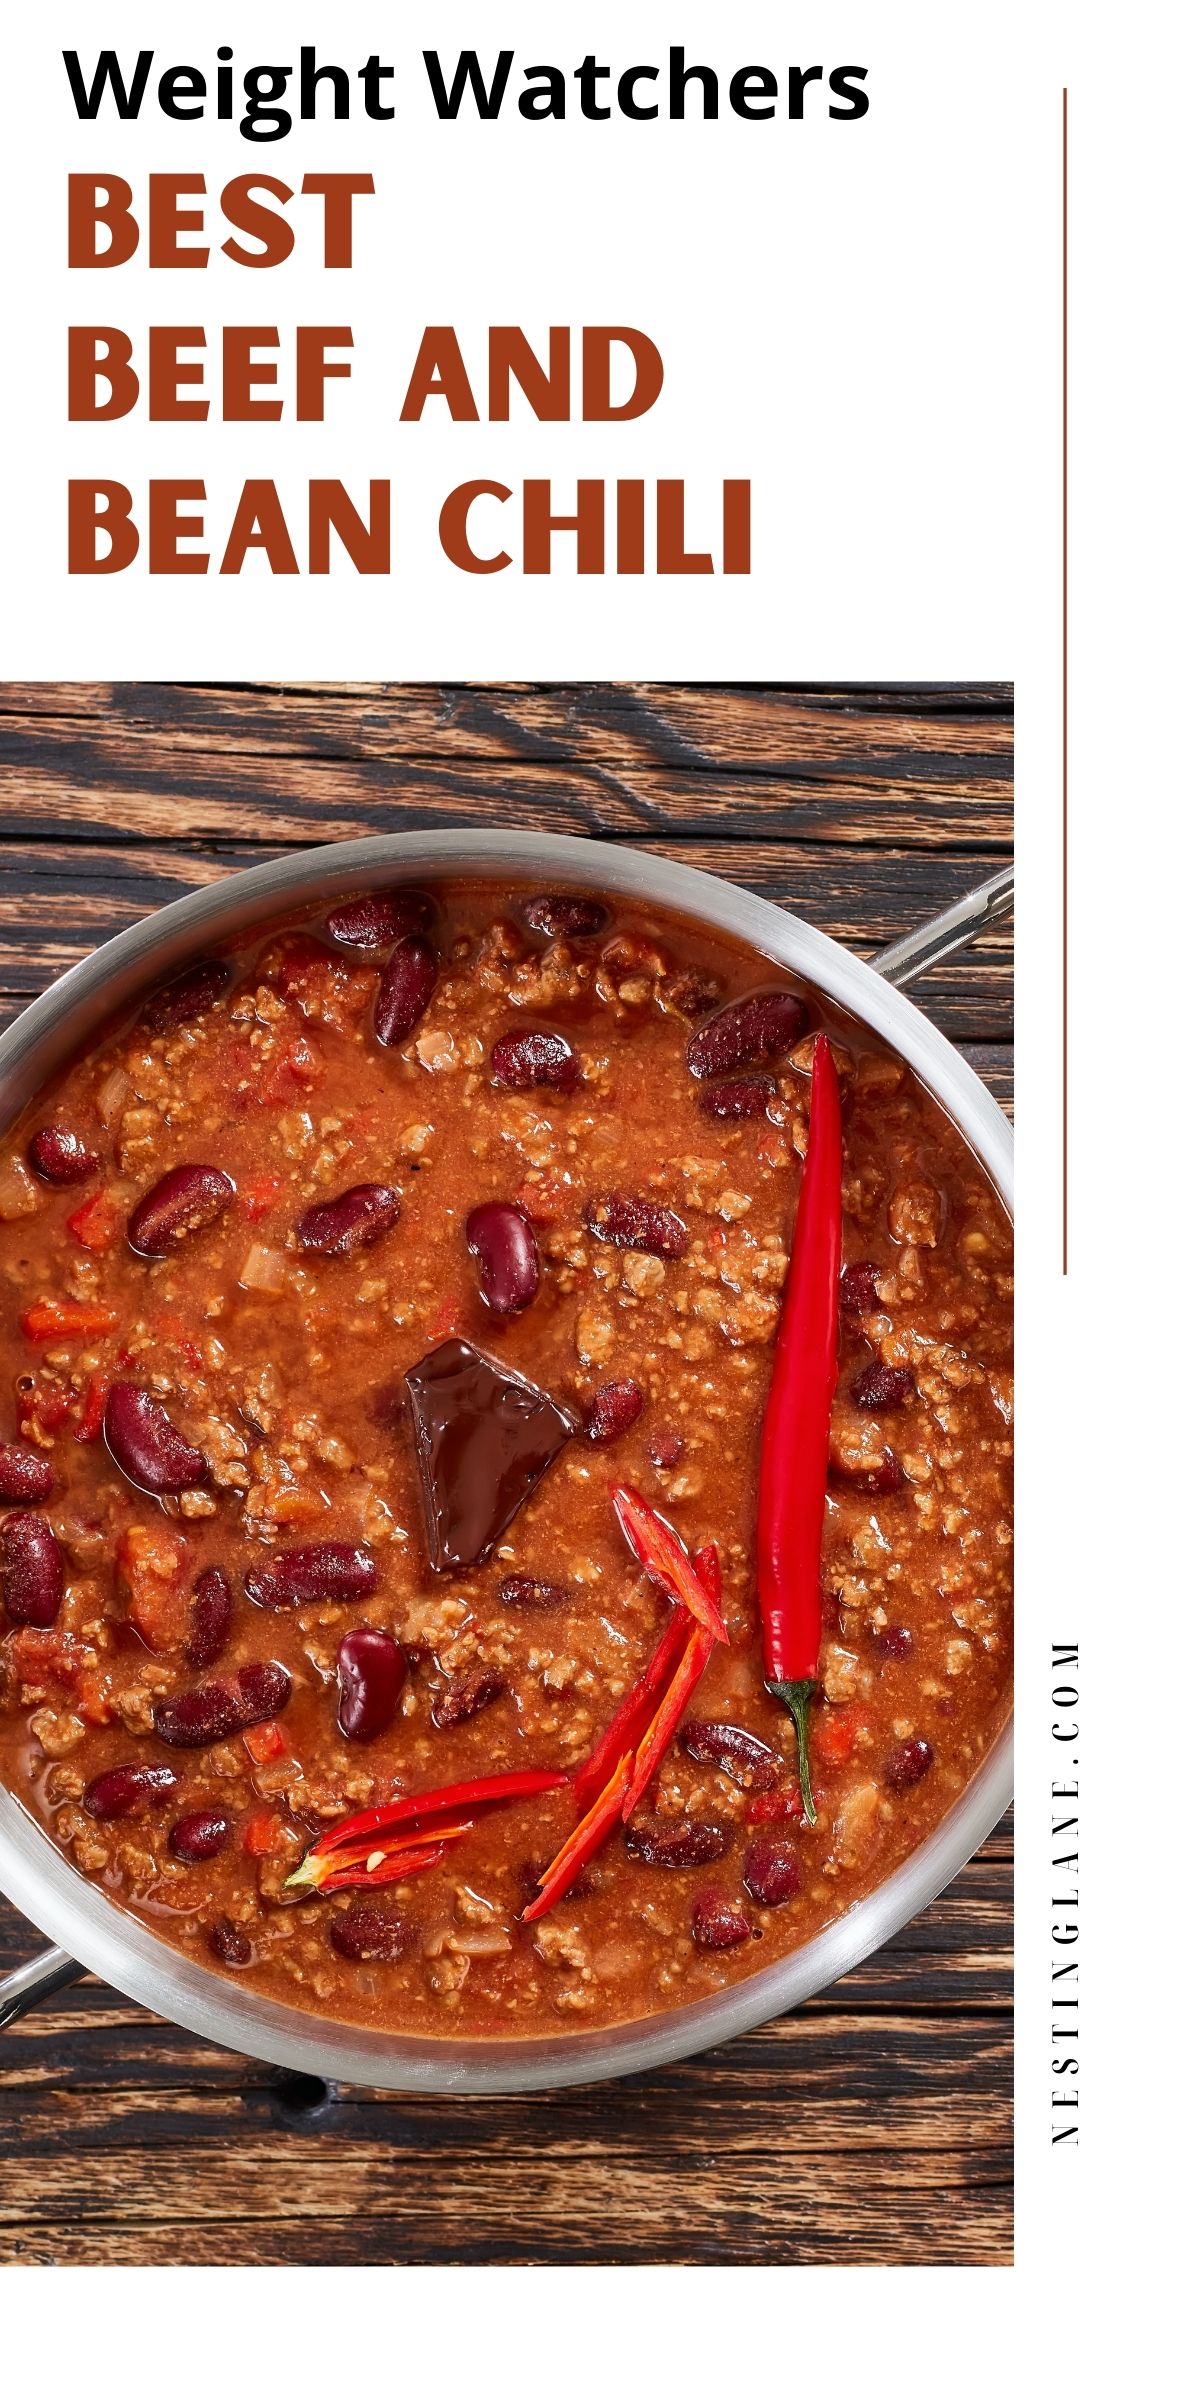 Weight Watchers Beef and Bean Chili Graphic.